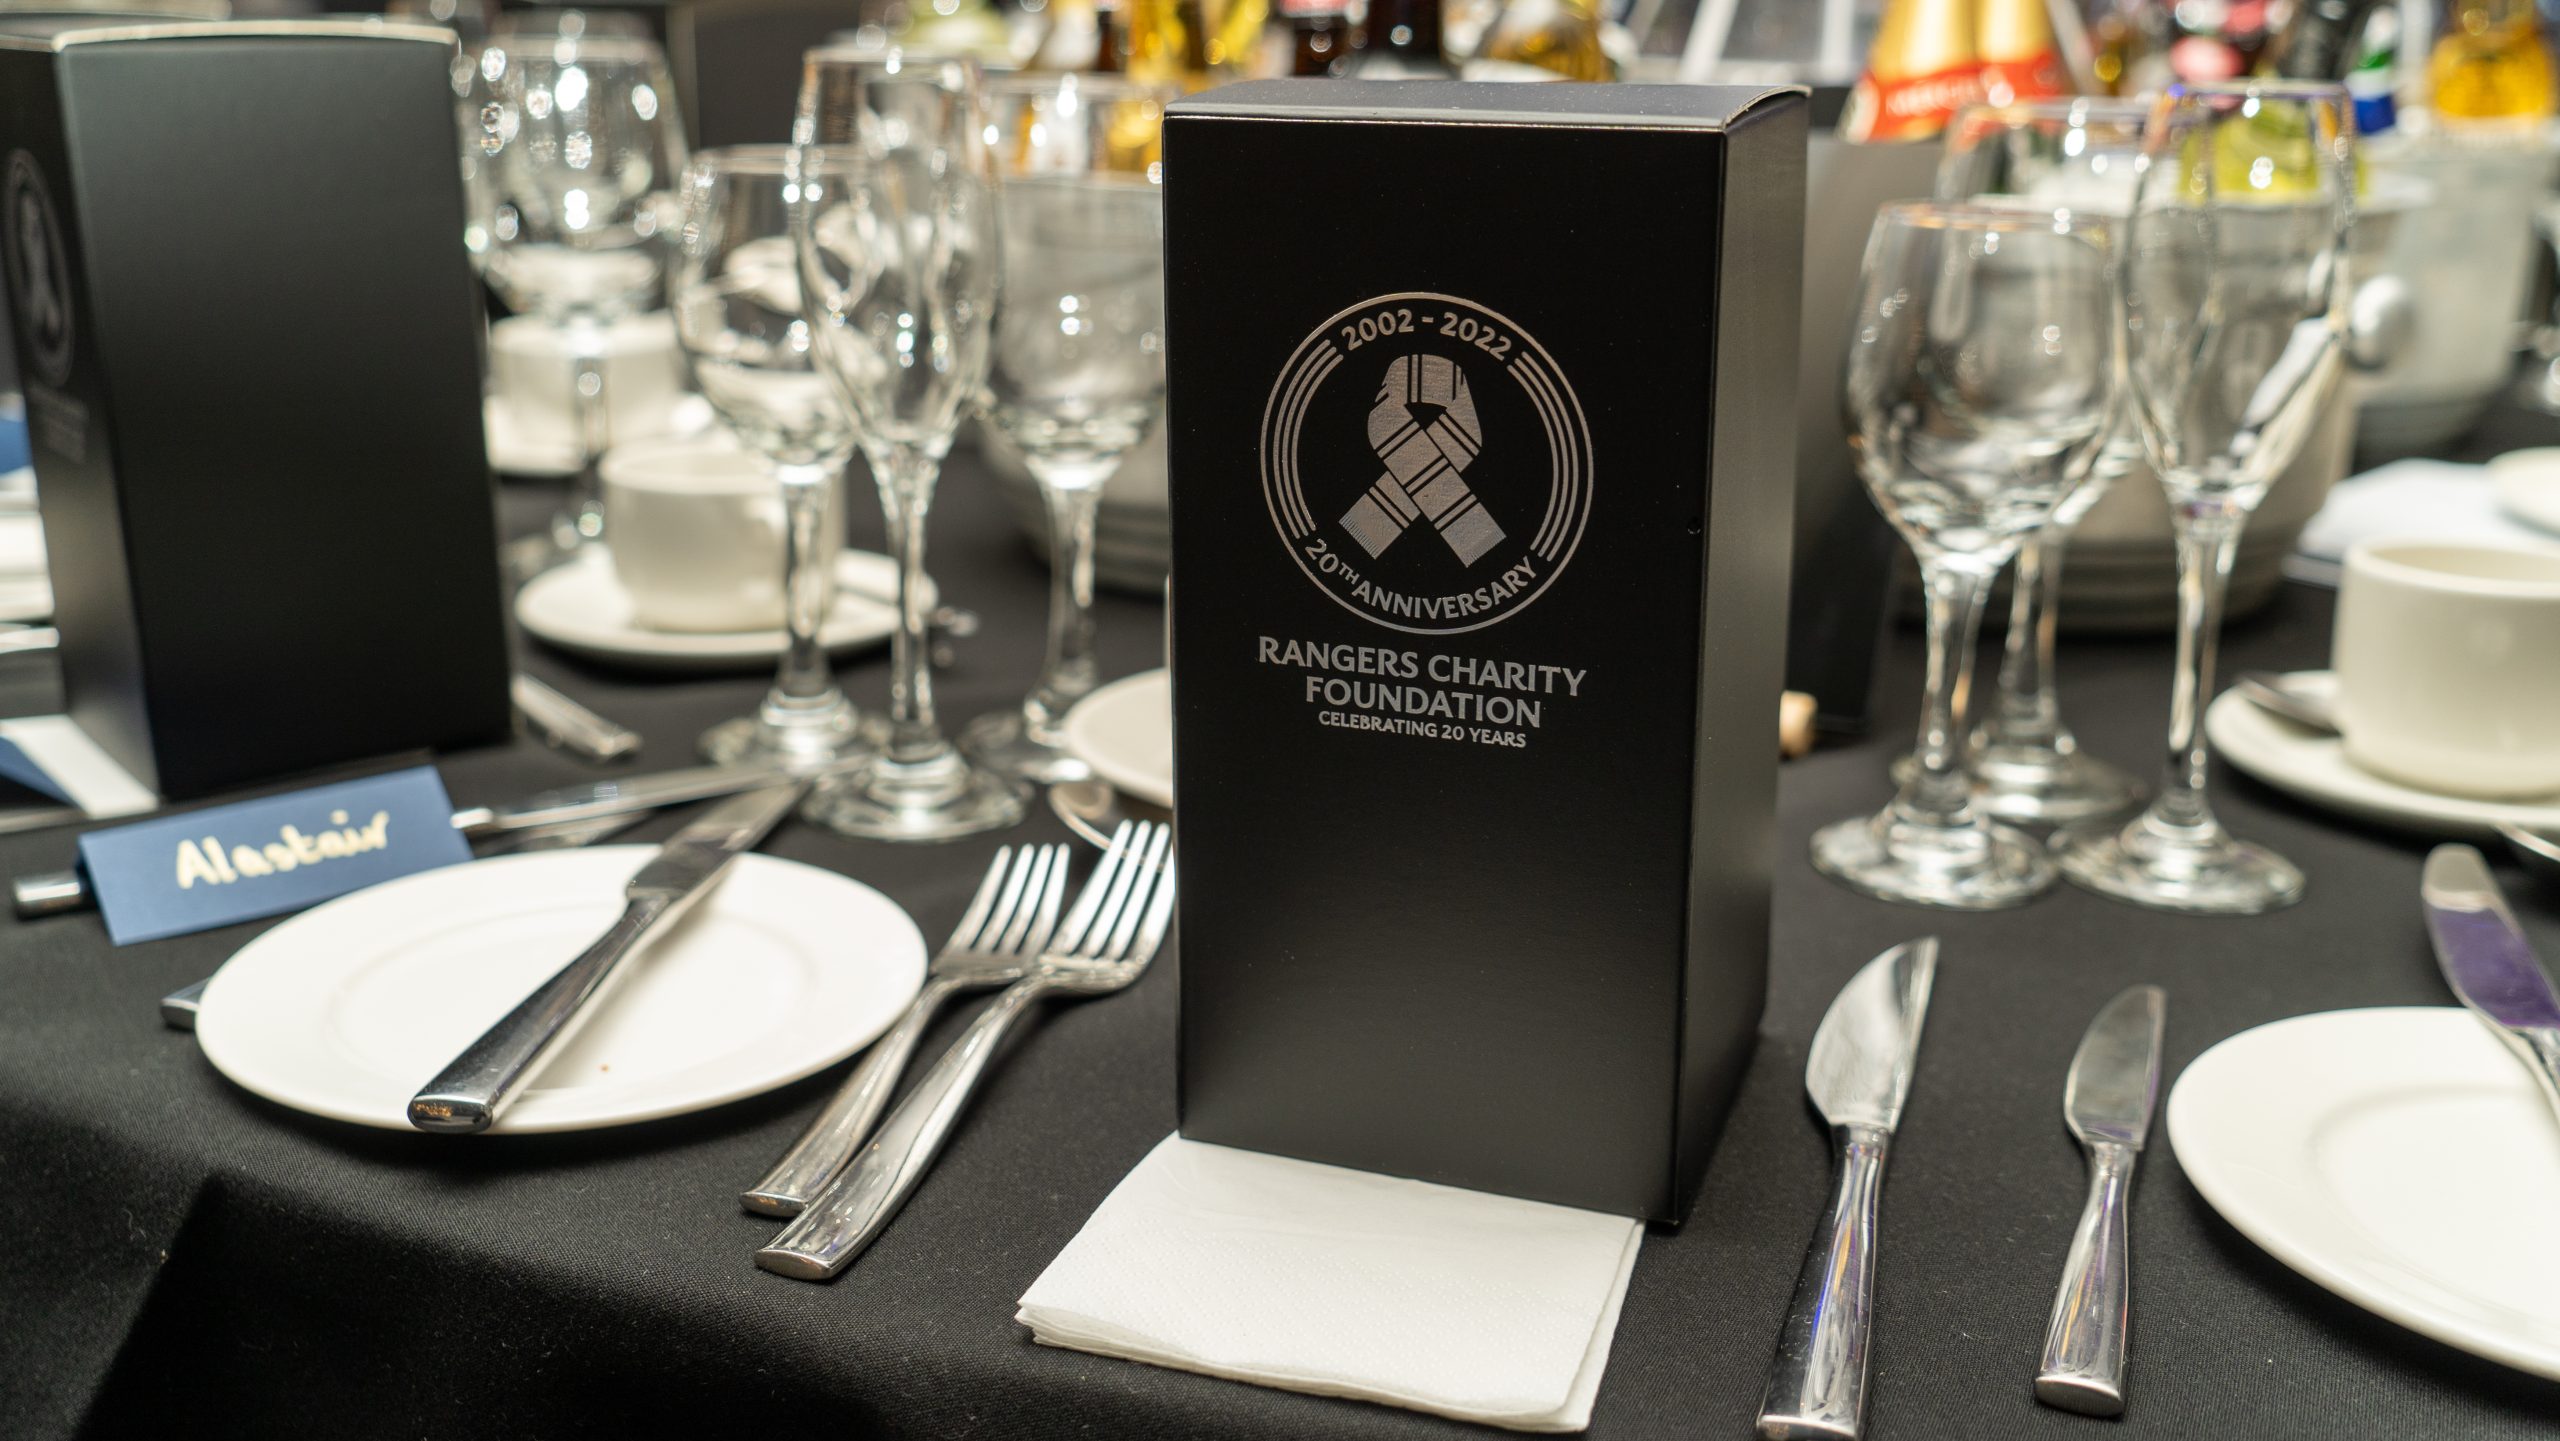 A Rangers Charity Foundation branded box on a dining table